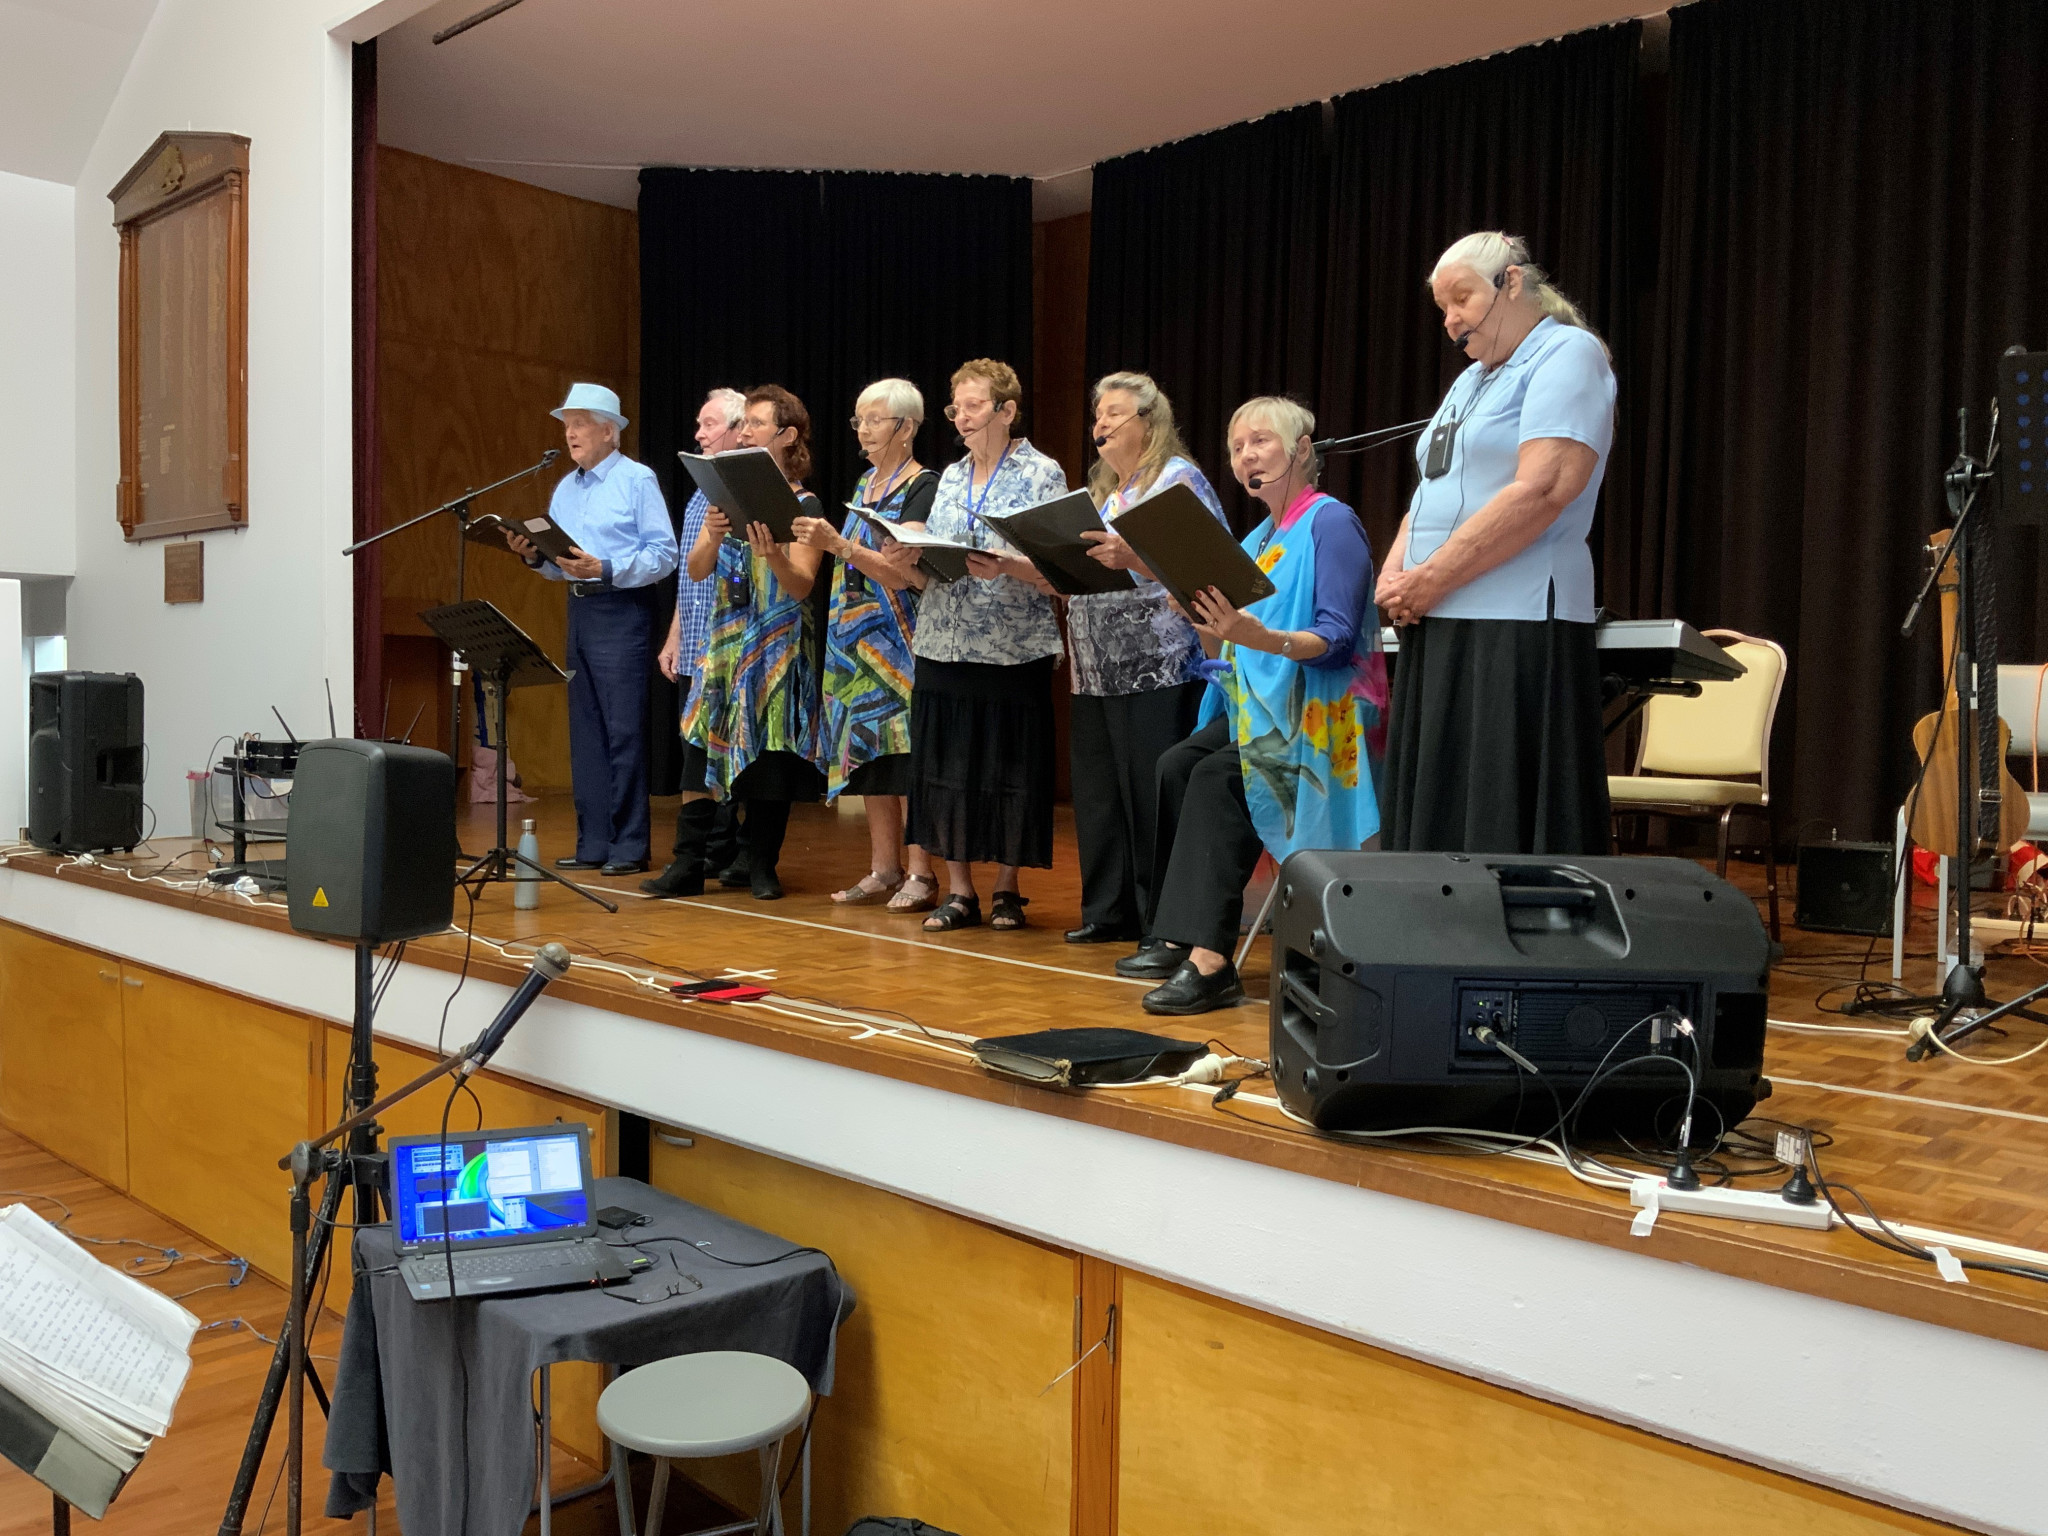 The Woodford Singers sang a number of songs at the Woodford Memorial Hall last Wednesday.